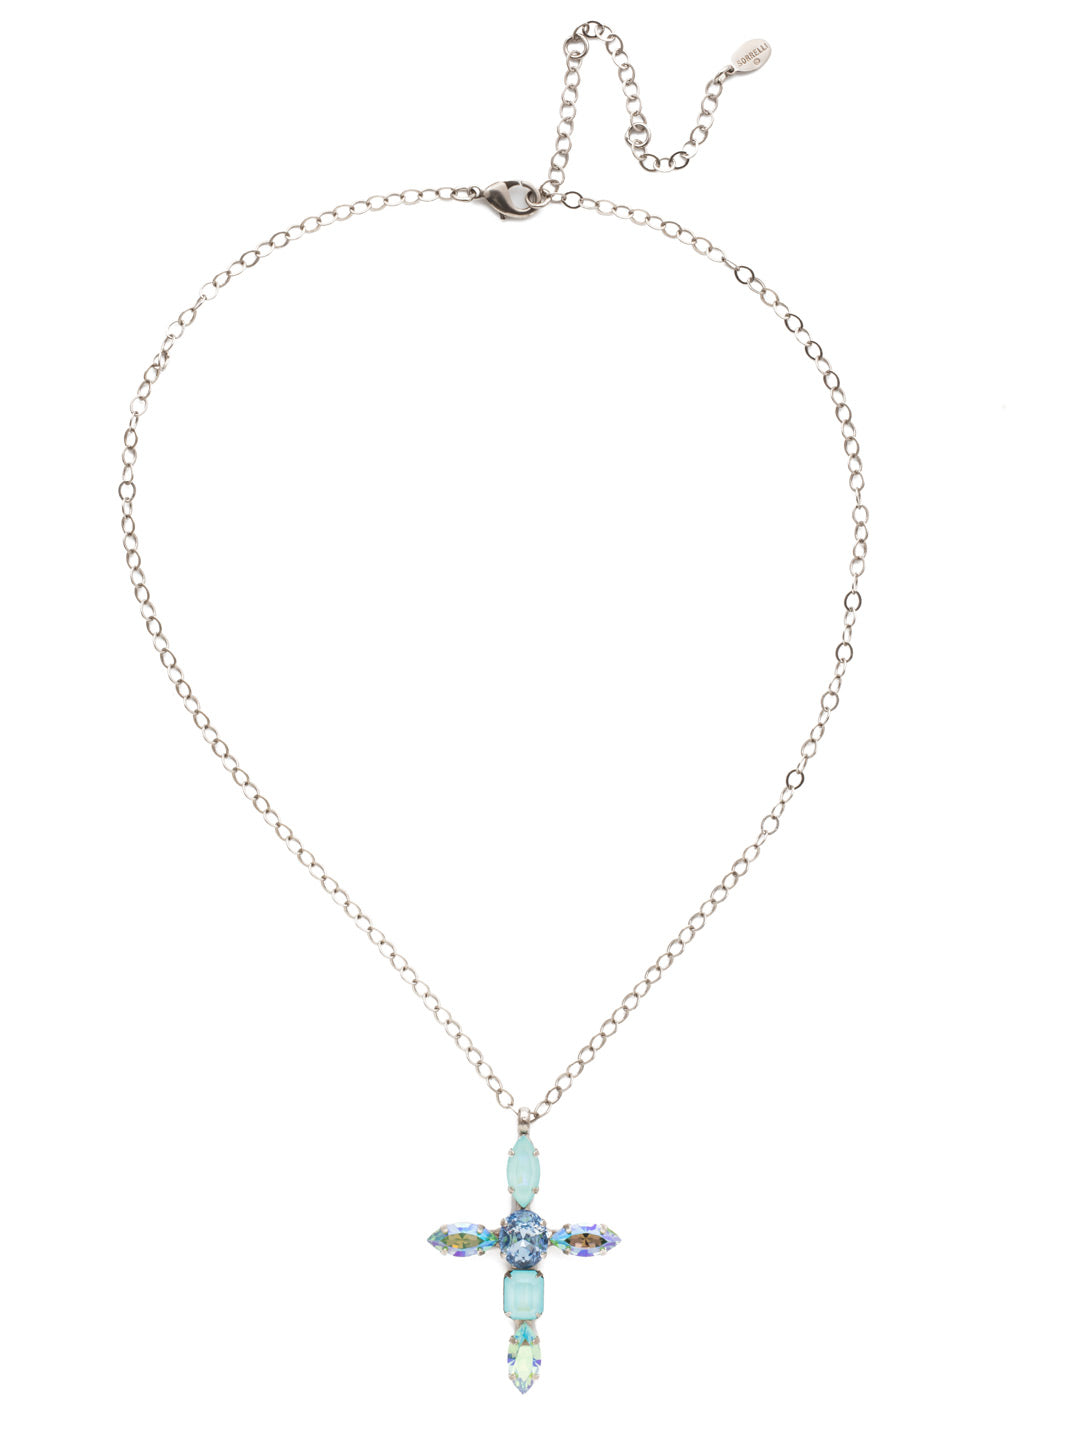 Ansley Pendant Necklace - NET18ASBWB - <p>The Ansley Pendant Necklace features a cross crafted from sparkling navette, antique emerald and round crystals in varying shades. From Sorrelli's Bluewater Breeze collection in our Antique Silver-tone finish.</p>